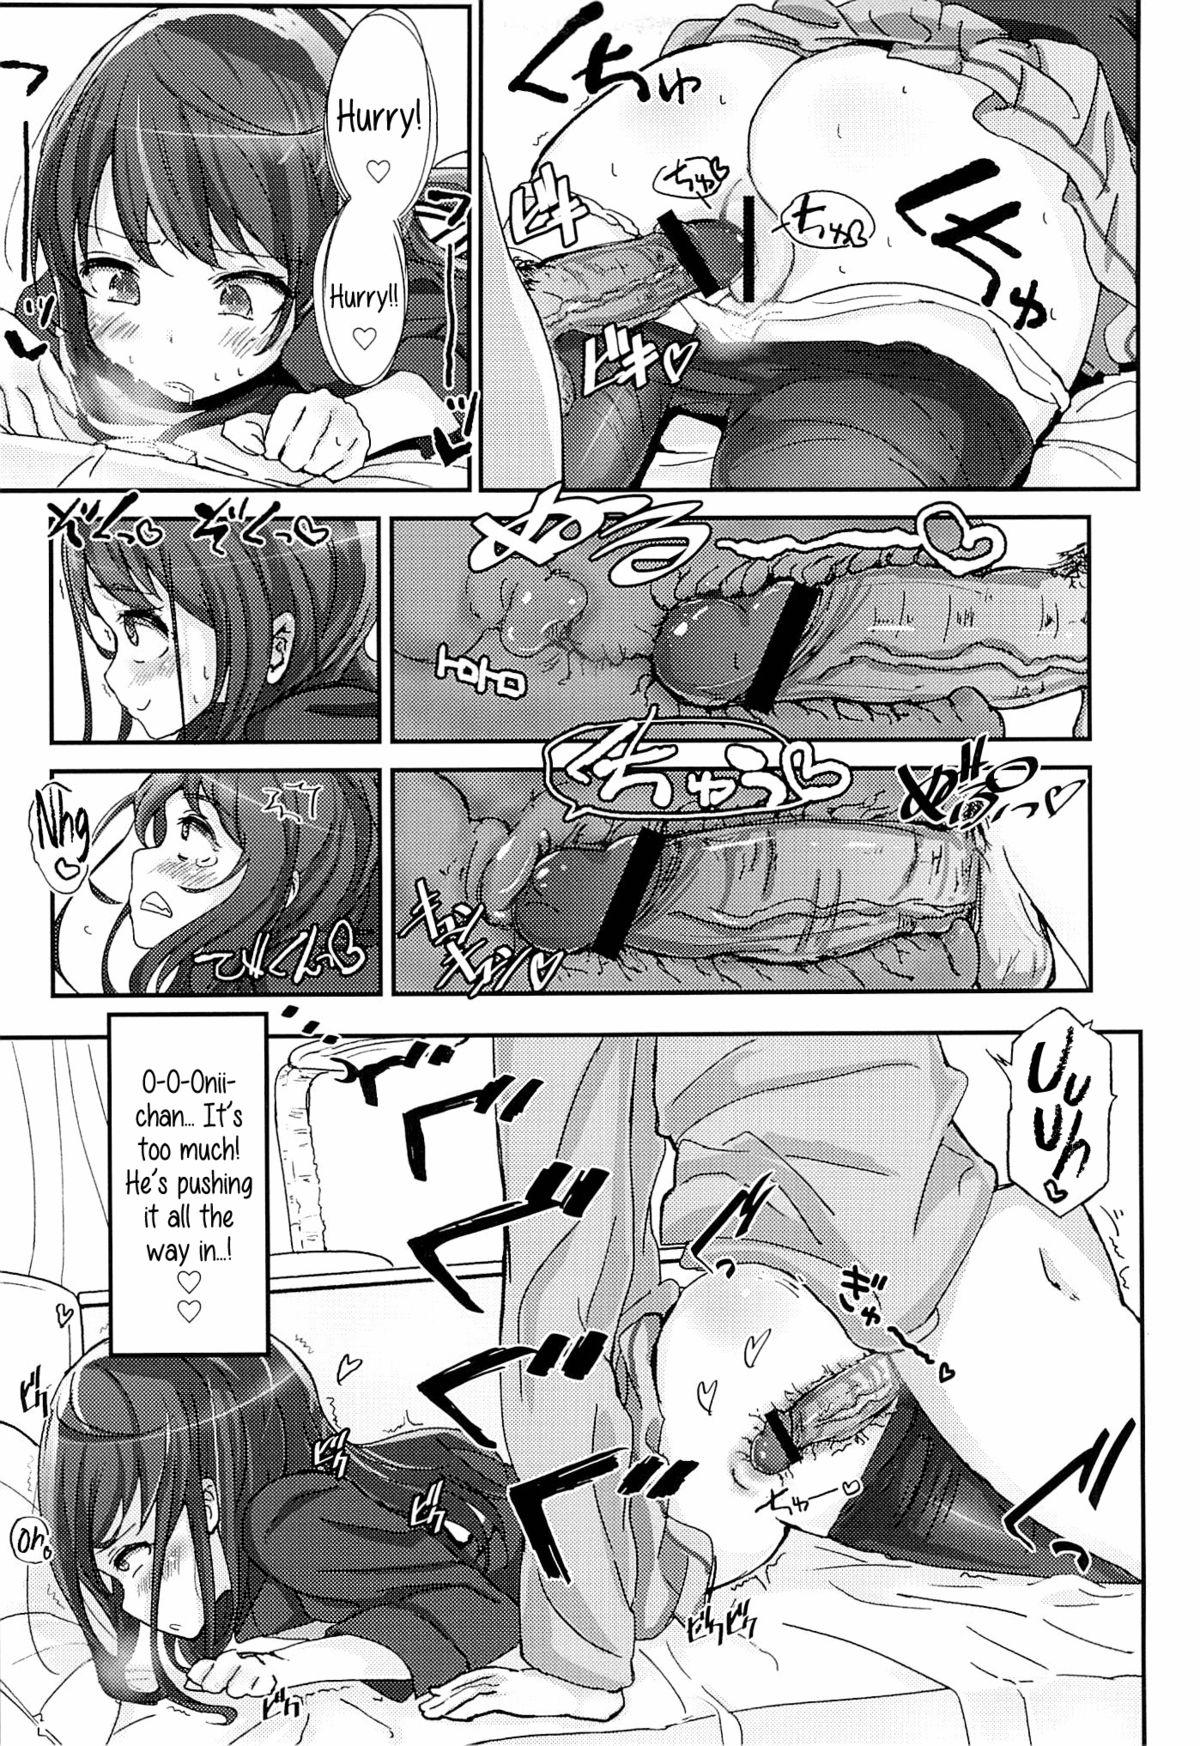 Sperm Shikyuukou no Kanata, Onii chan no Hate | Beyond the mouth of the uterus lies Onii-chan’s demise Ejaculation - Page 6